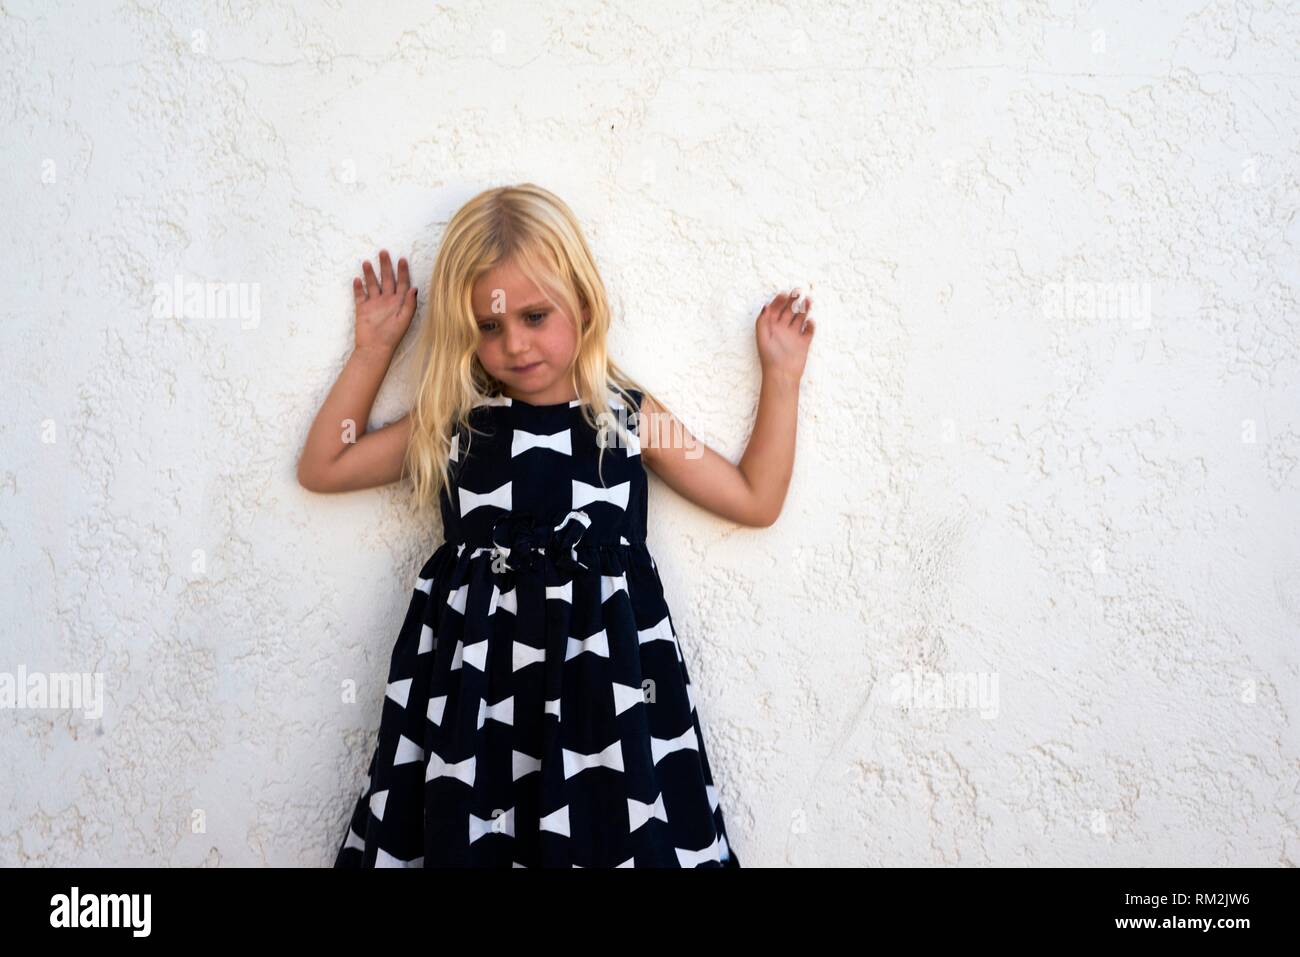 thoughtful female child in dress (metaphor for pressing children in societal norms and gendering) holding arms up, leaning against white wall, Stock Photo